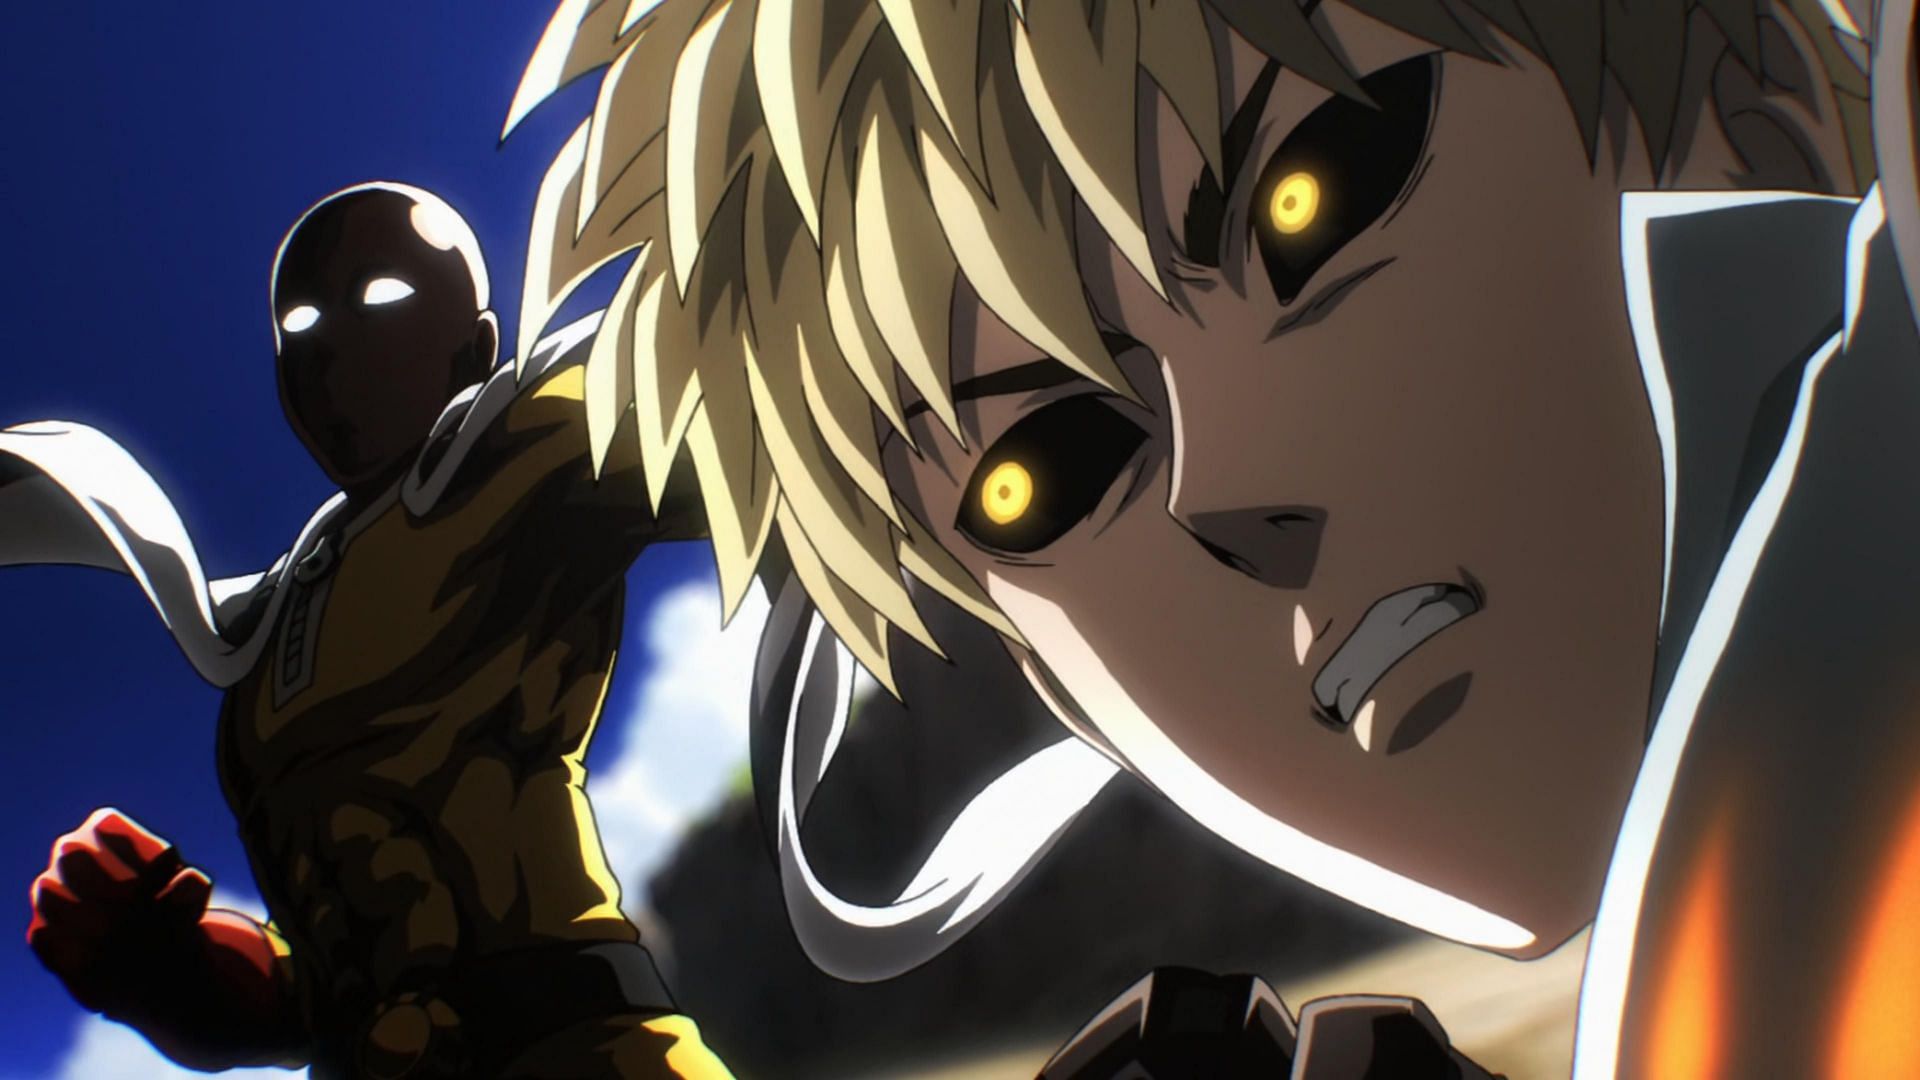 One-Punch Man: 8 things to expect in Season 3